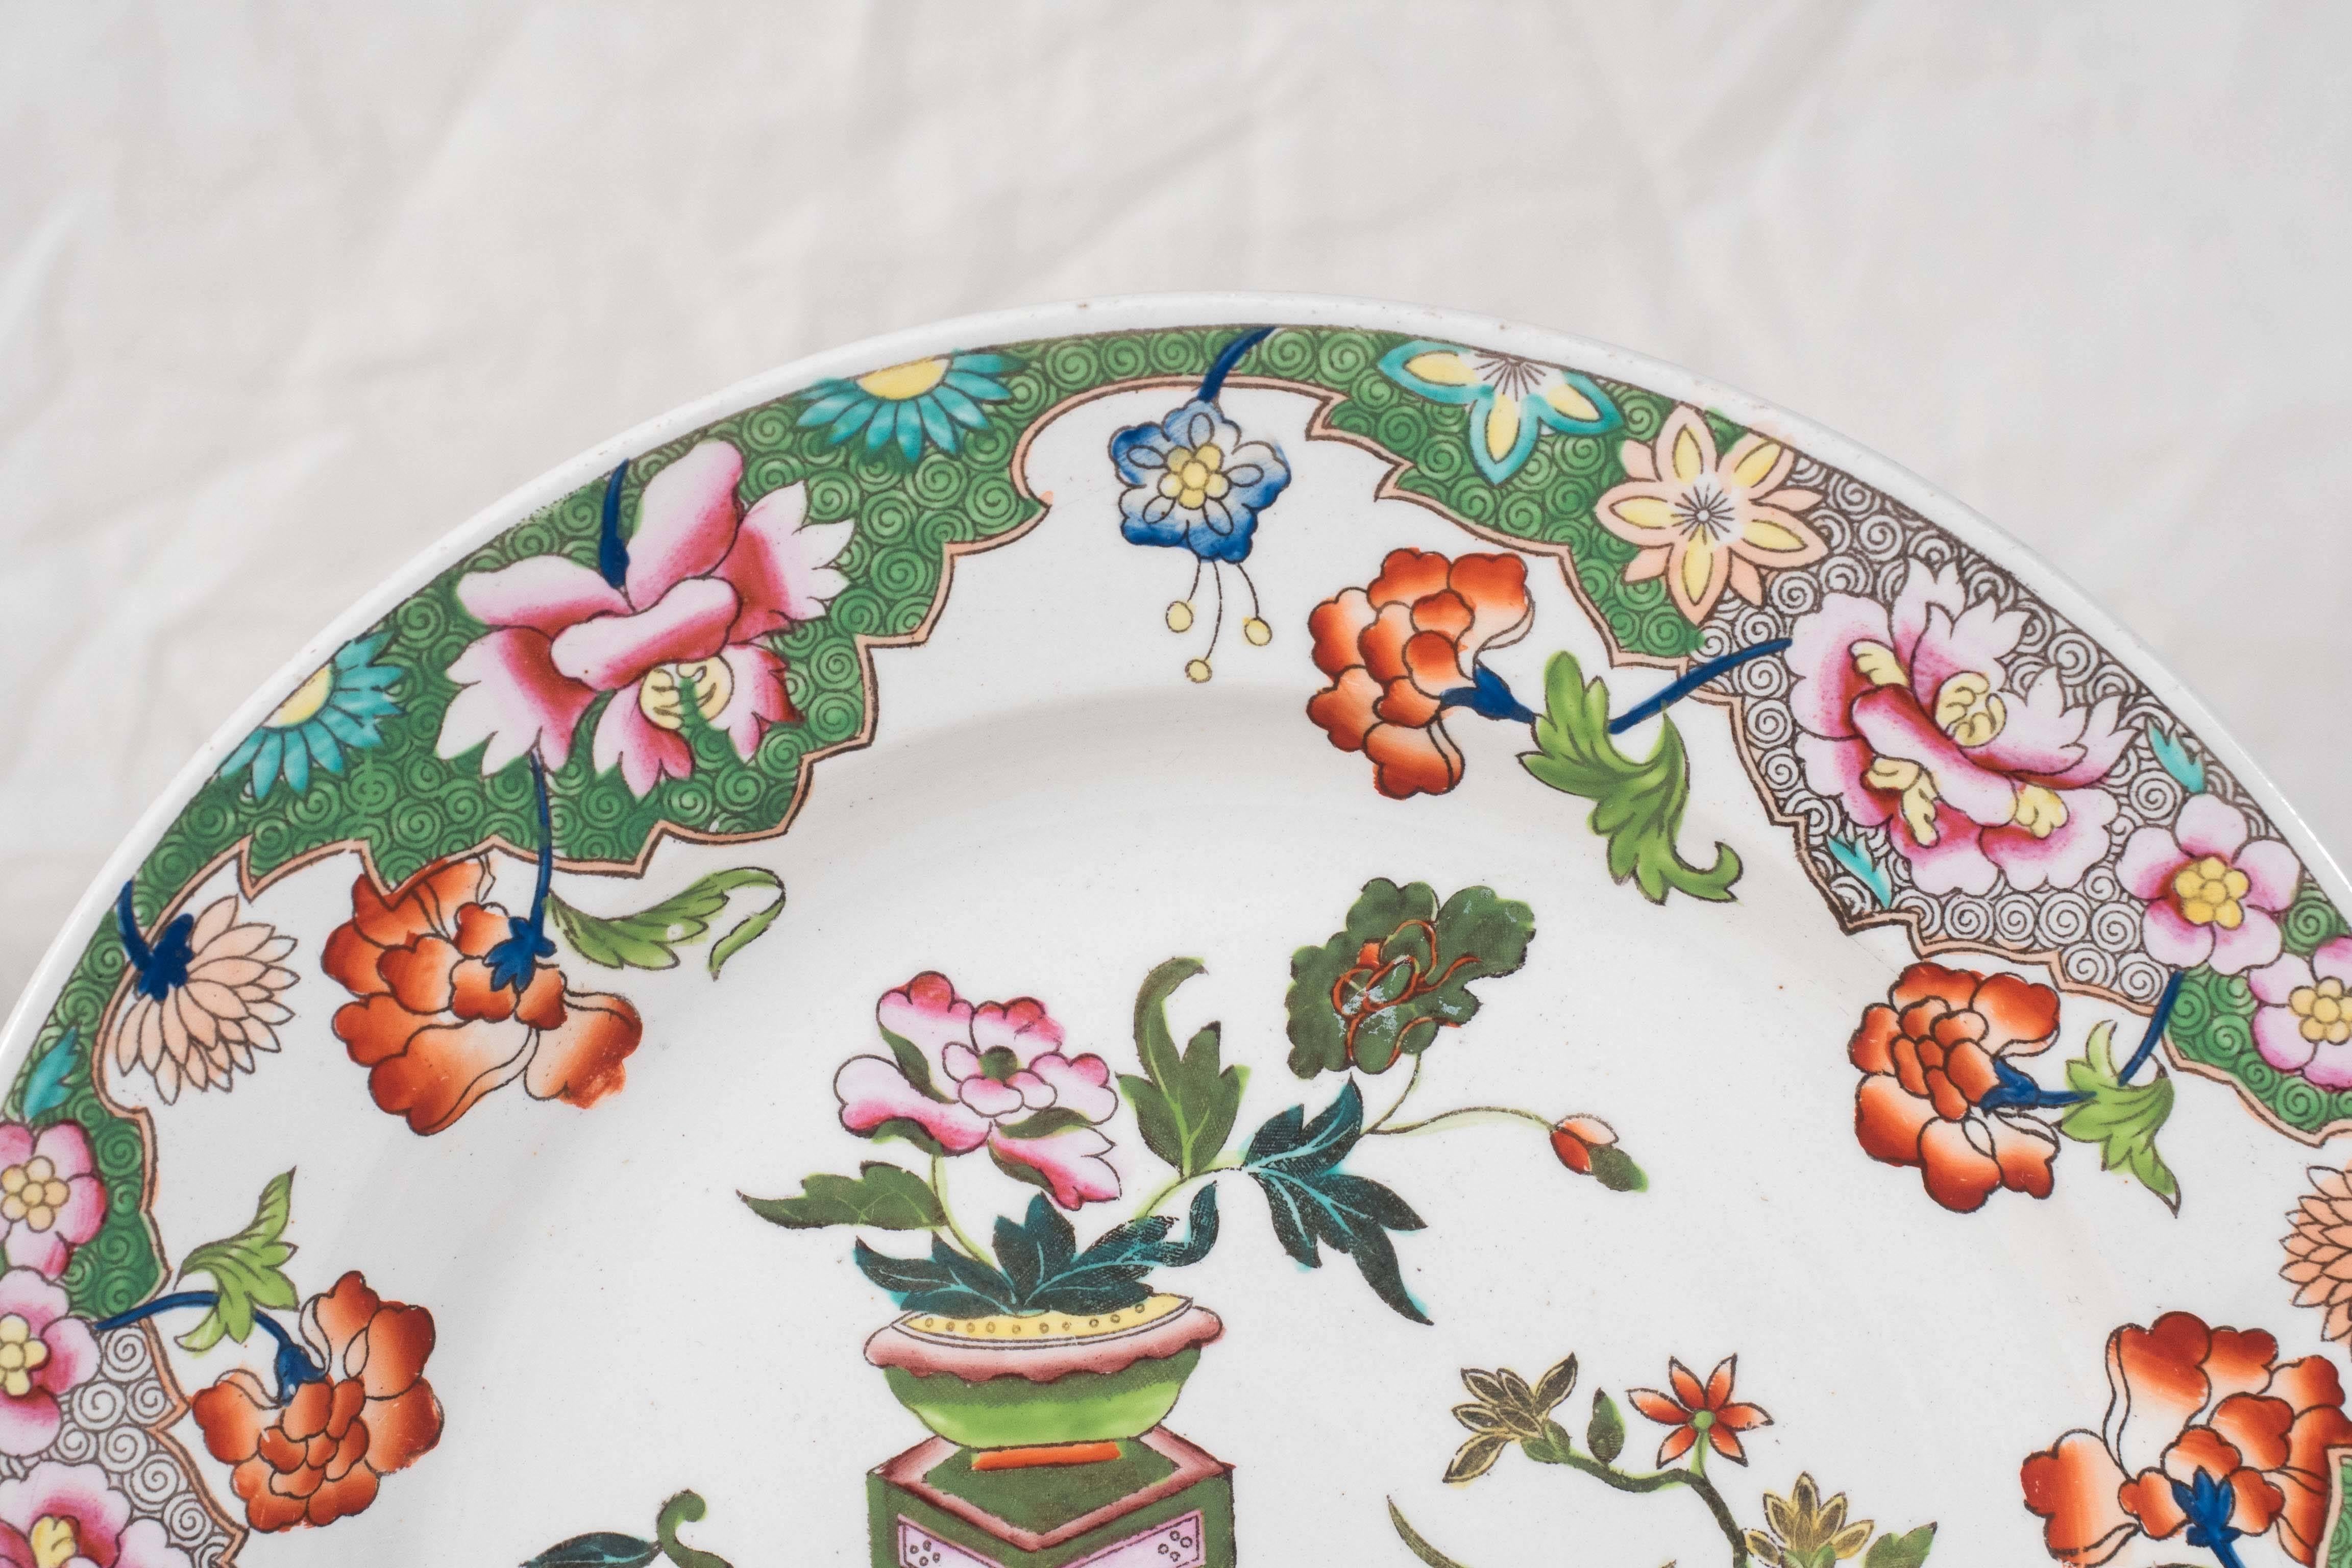 Chinoiserie Set of Ten English Dishes with Famille Verte Style Made by Spode circa 1810